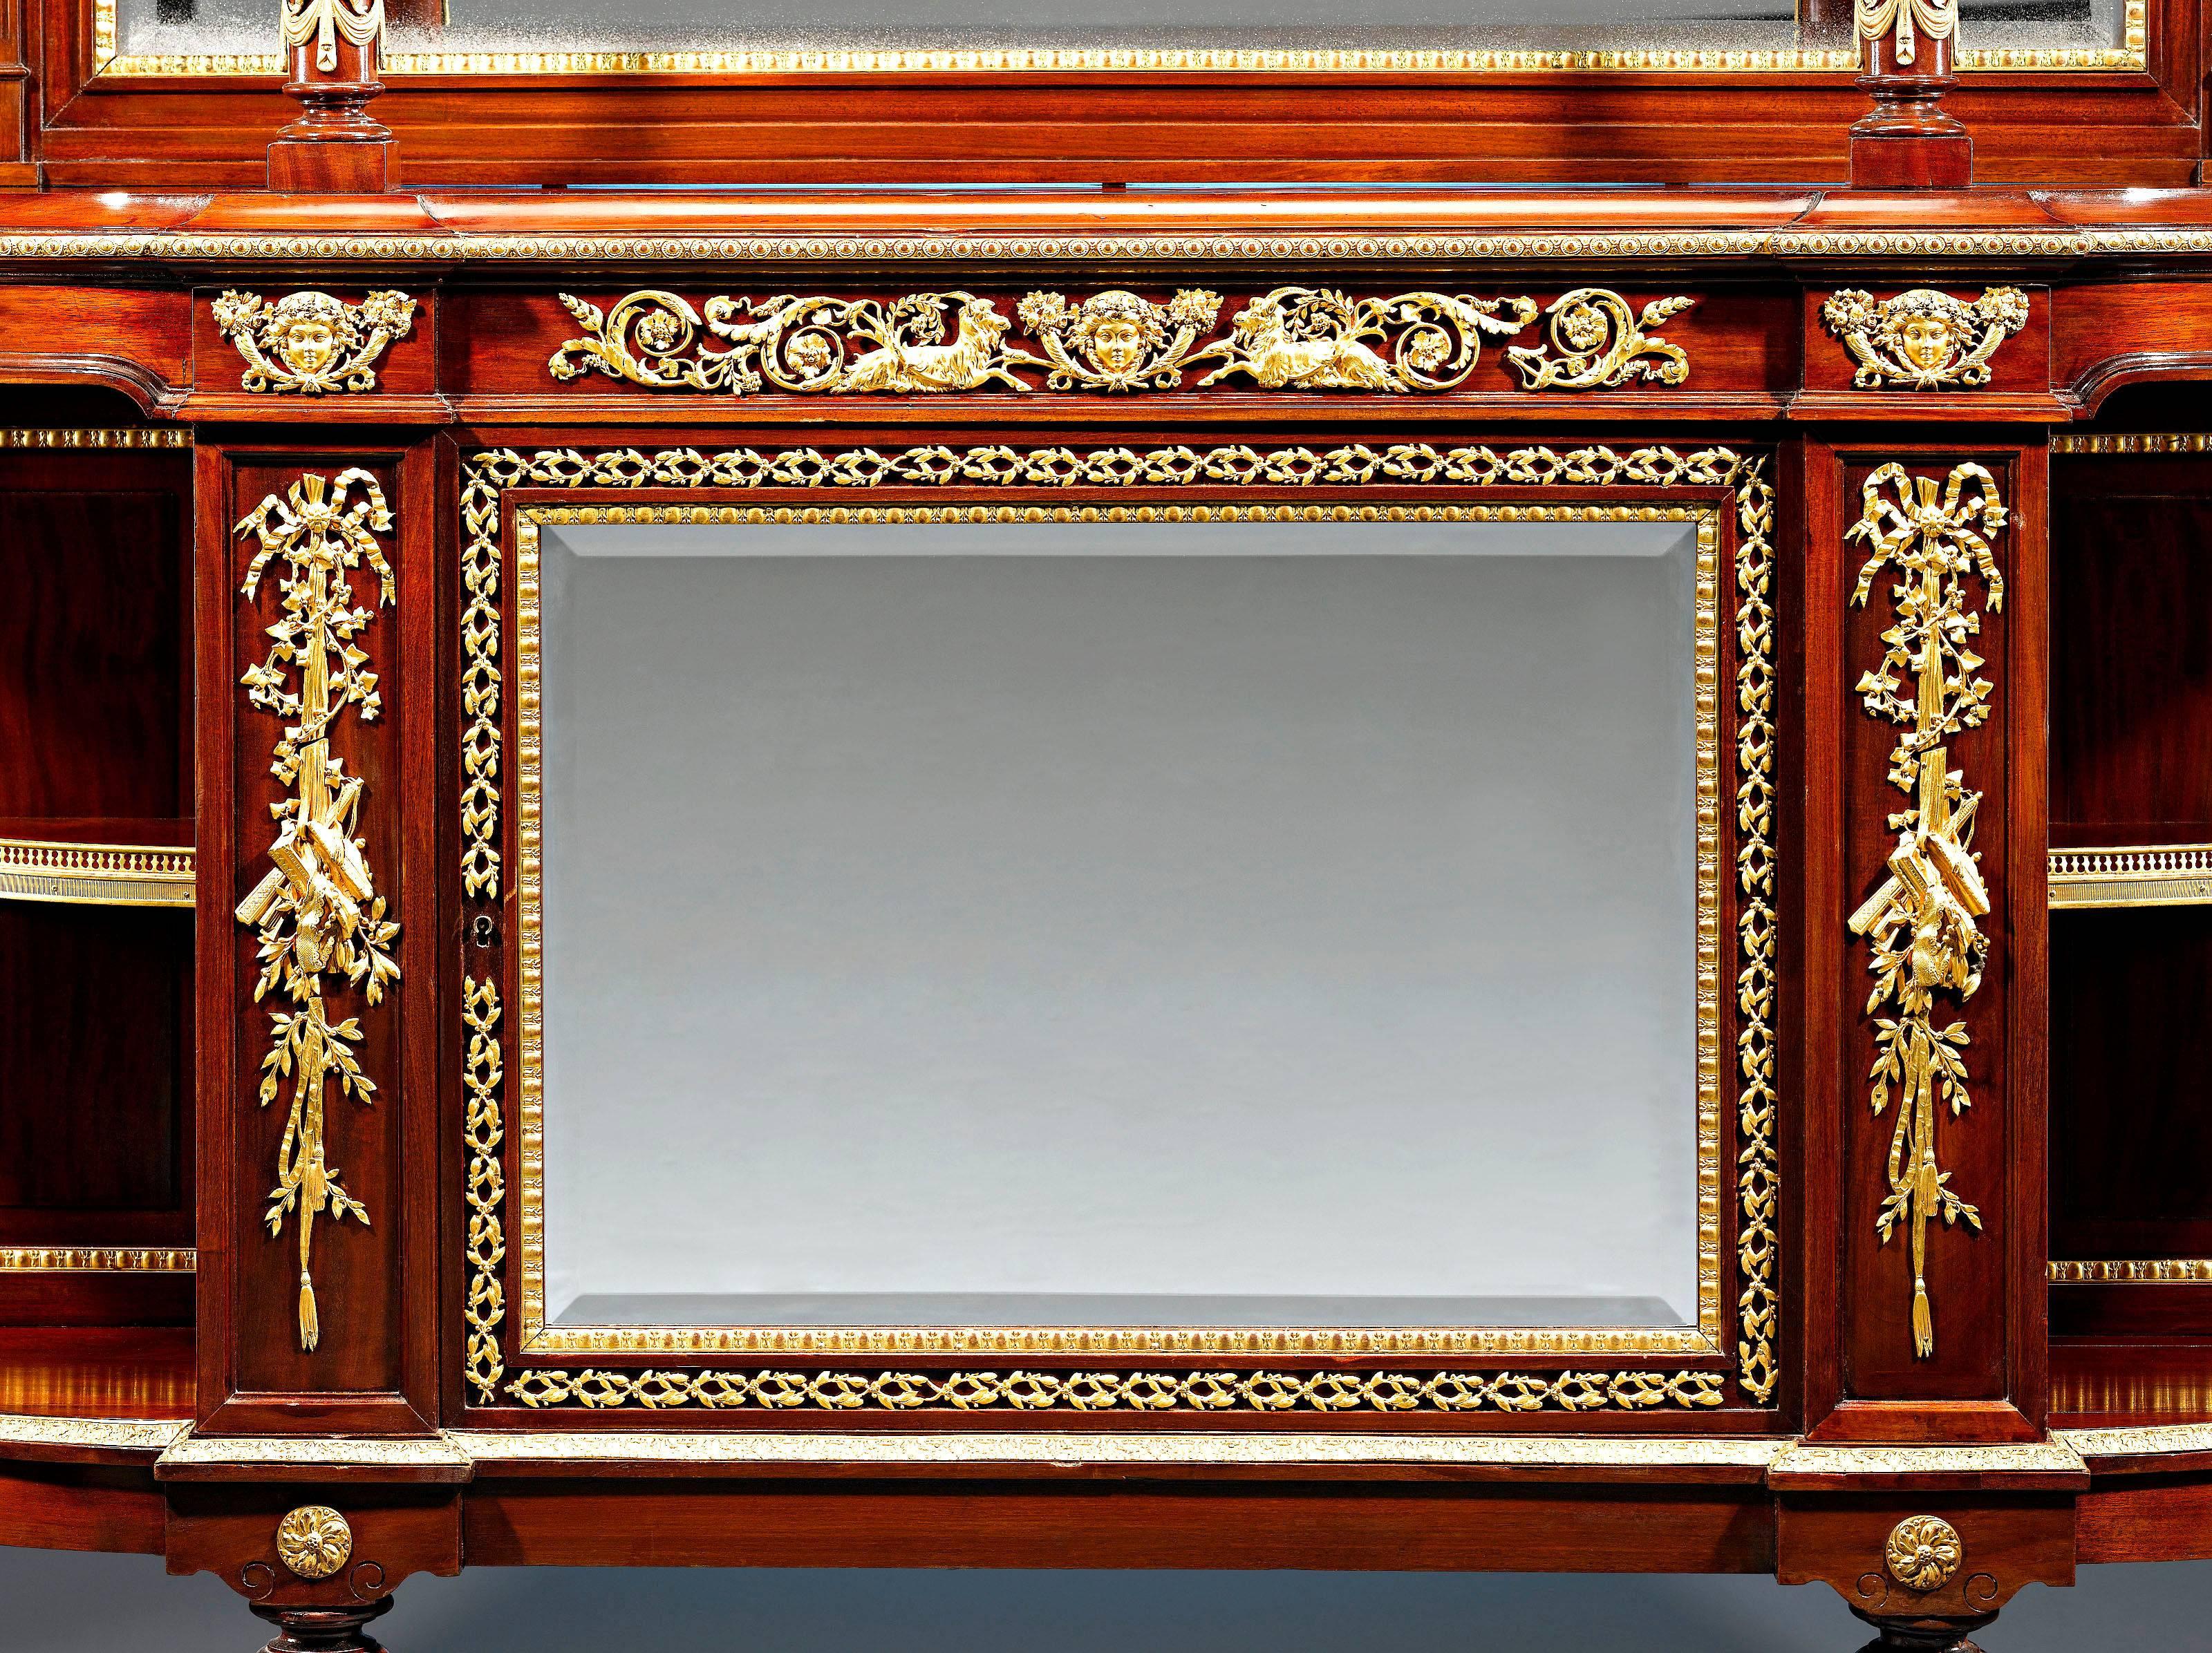 A splendid French Louis XVI style mahogany sideboard lavishly adorned with doré bronze mounts of the highest craftsmanship. Pierced doré bronze galleries complete the look of this exceptional work. Excellent condition,

circa 1870.